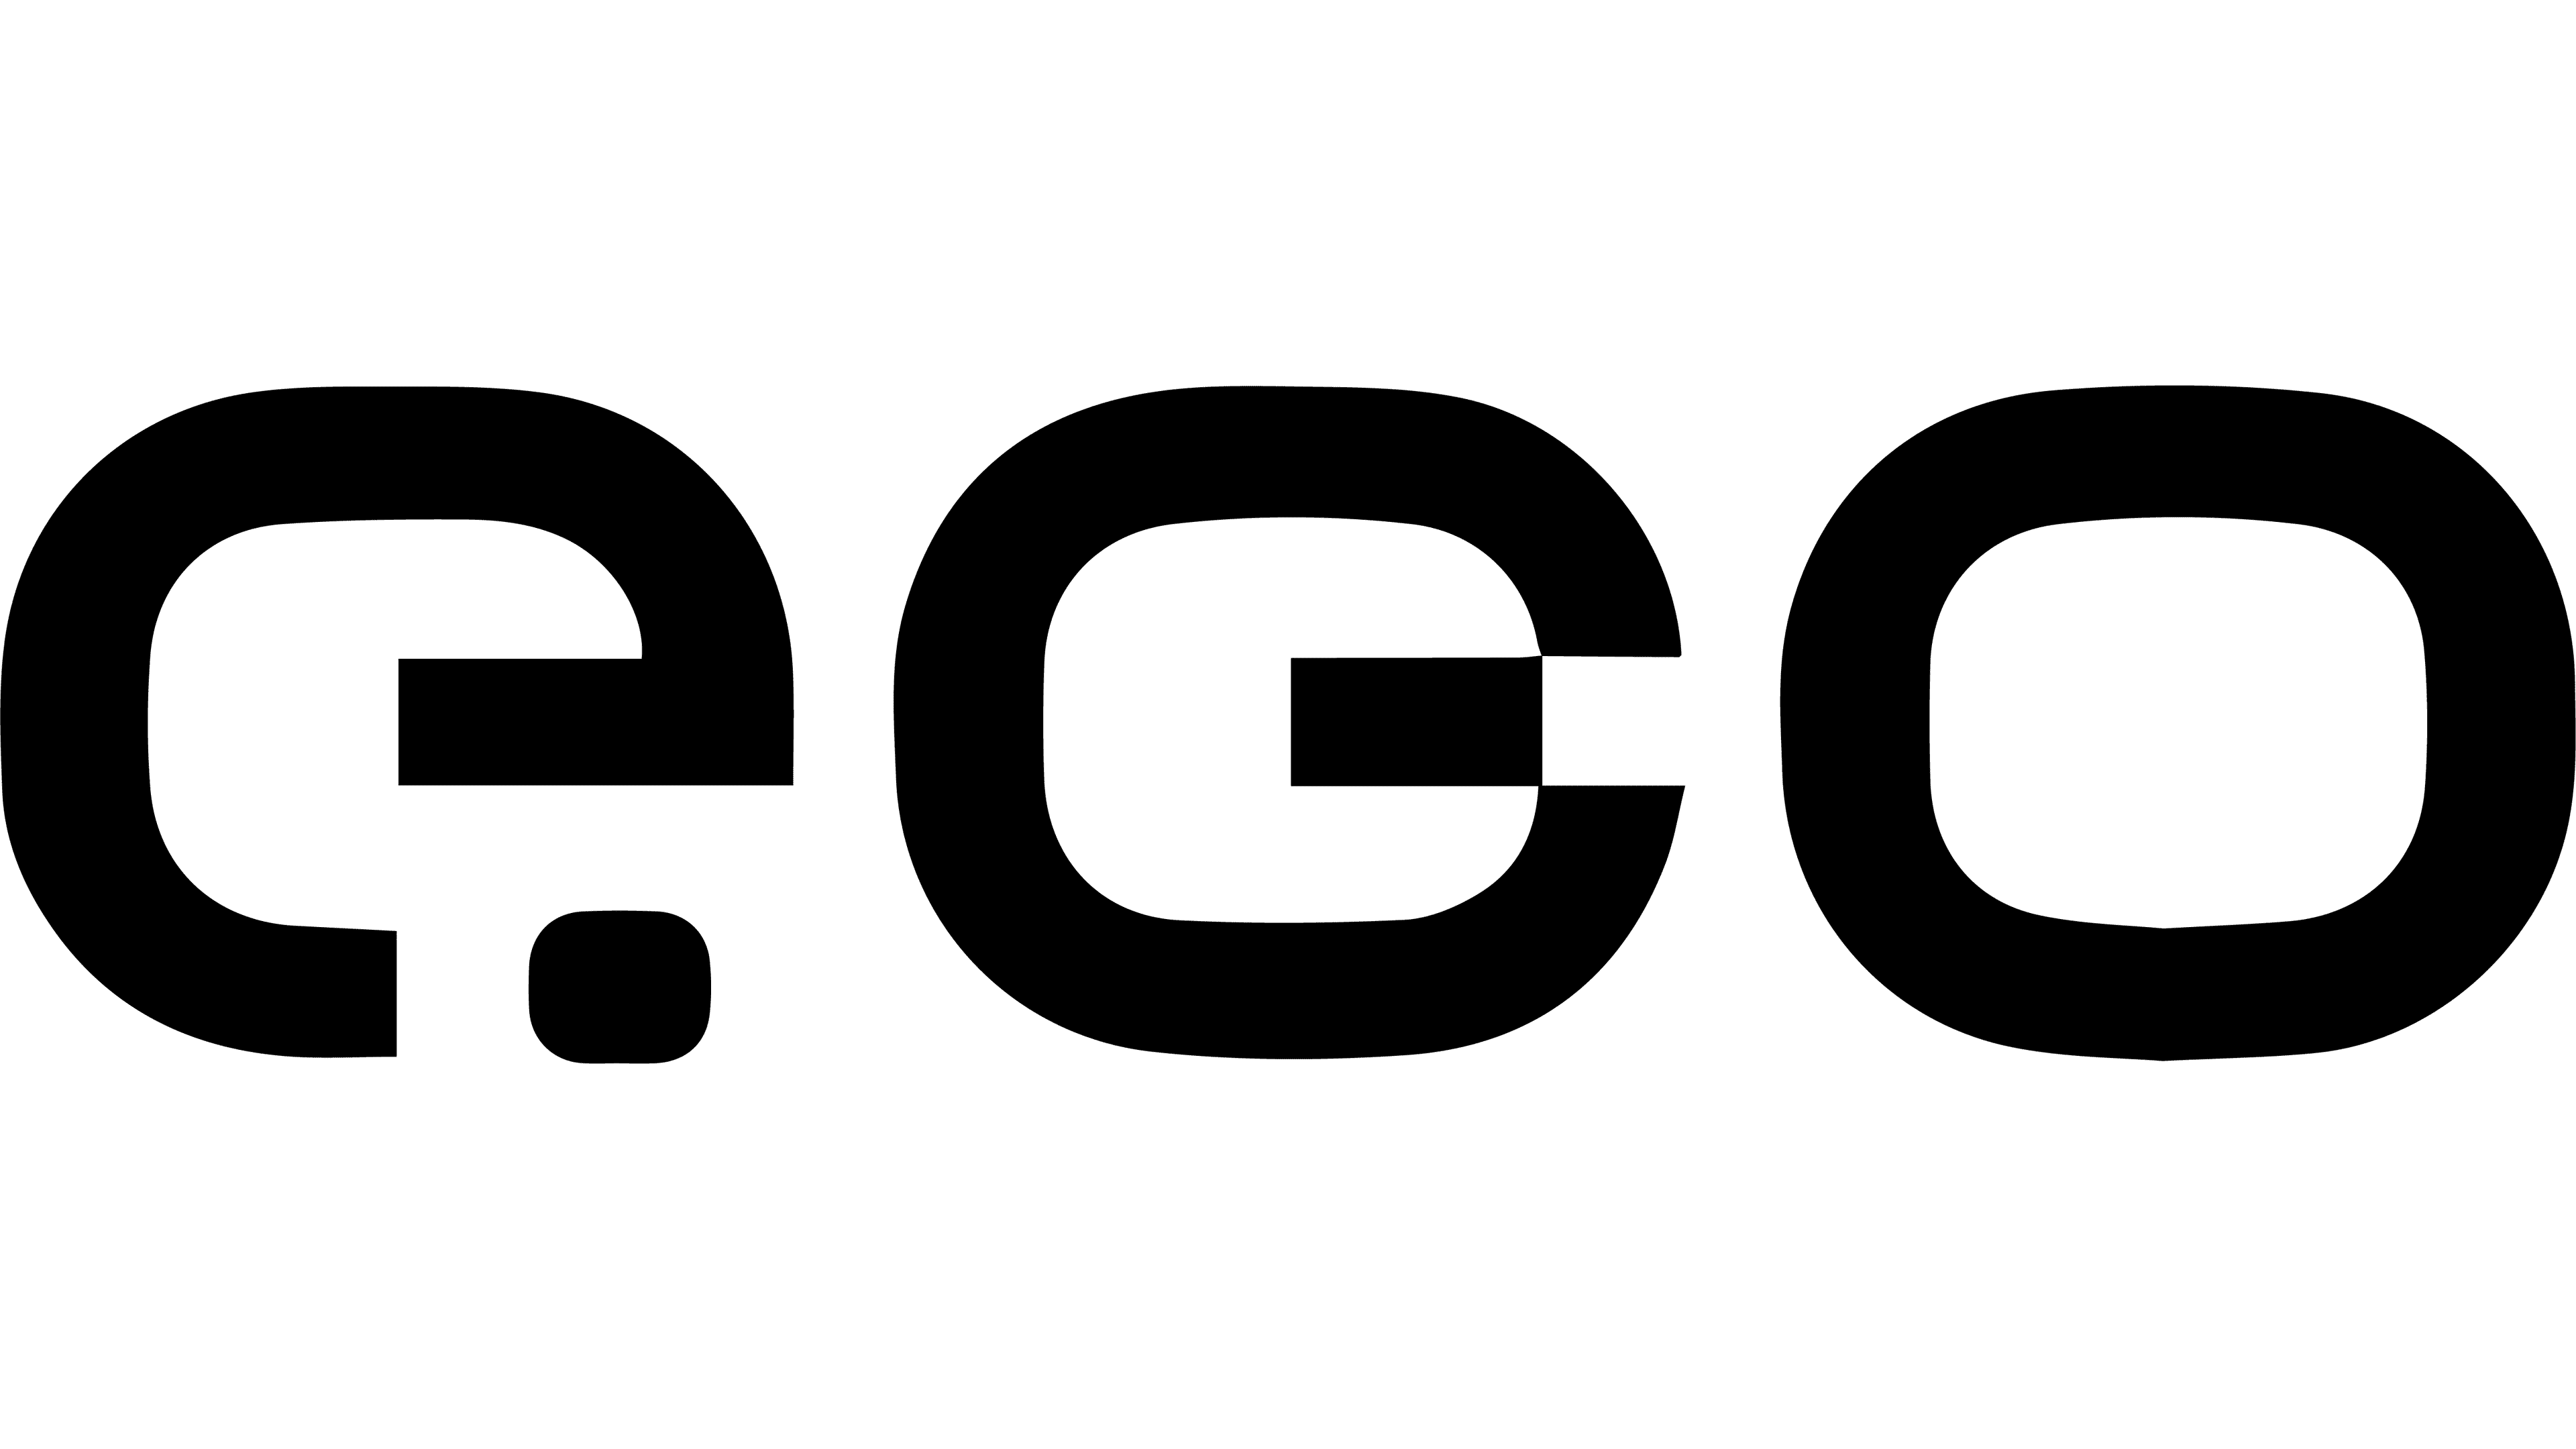 e.Go Logo and symbol, meaning, history, PNG, brand